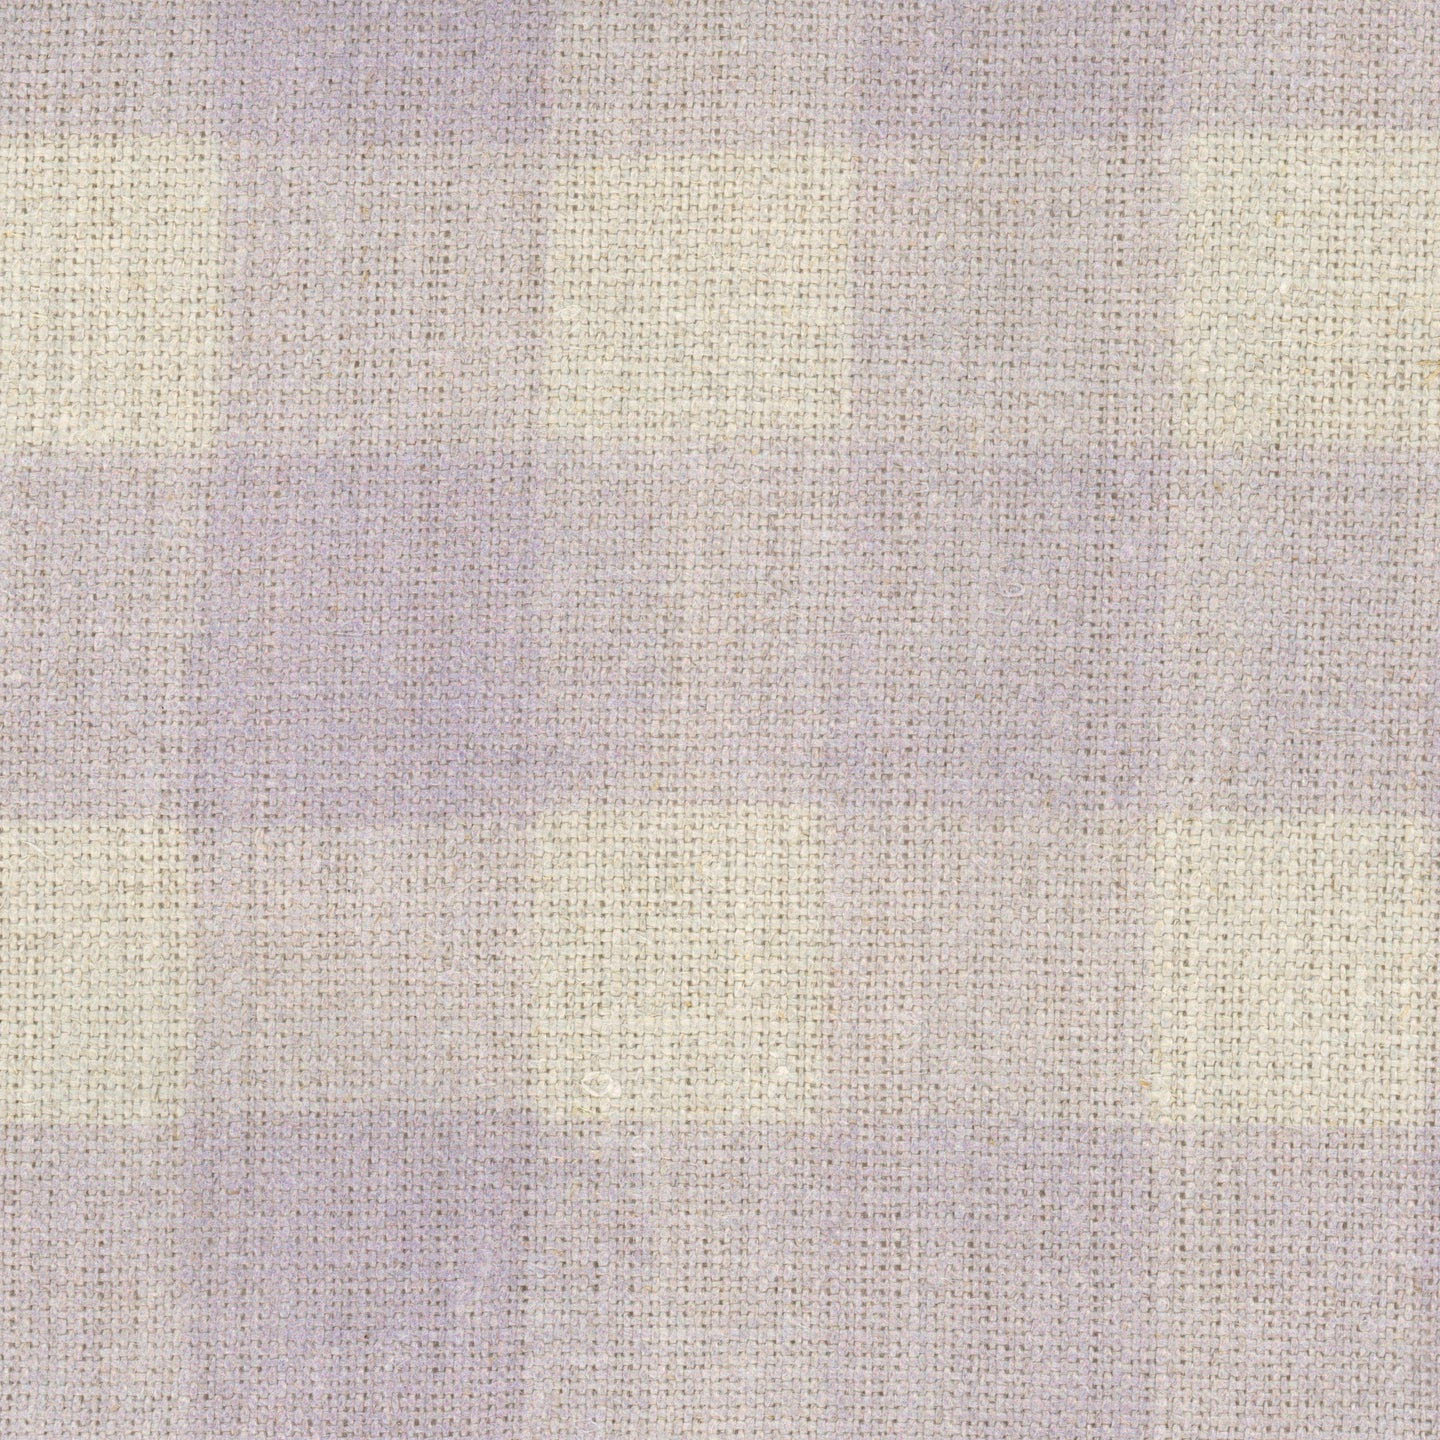 Picnic - Lilac Field on Natural Fabric